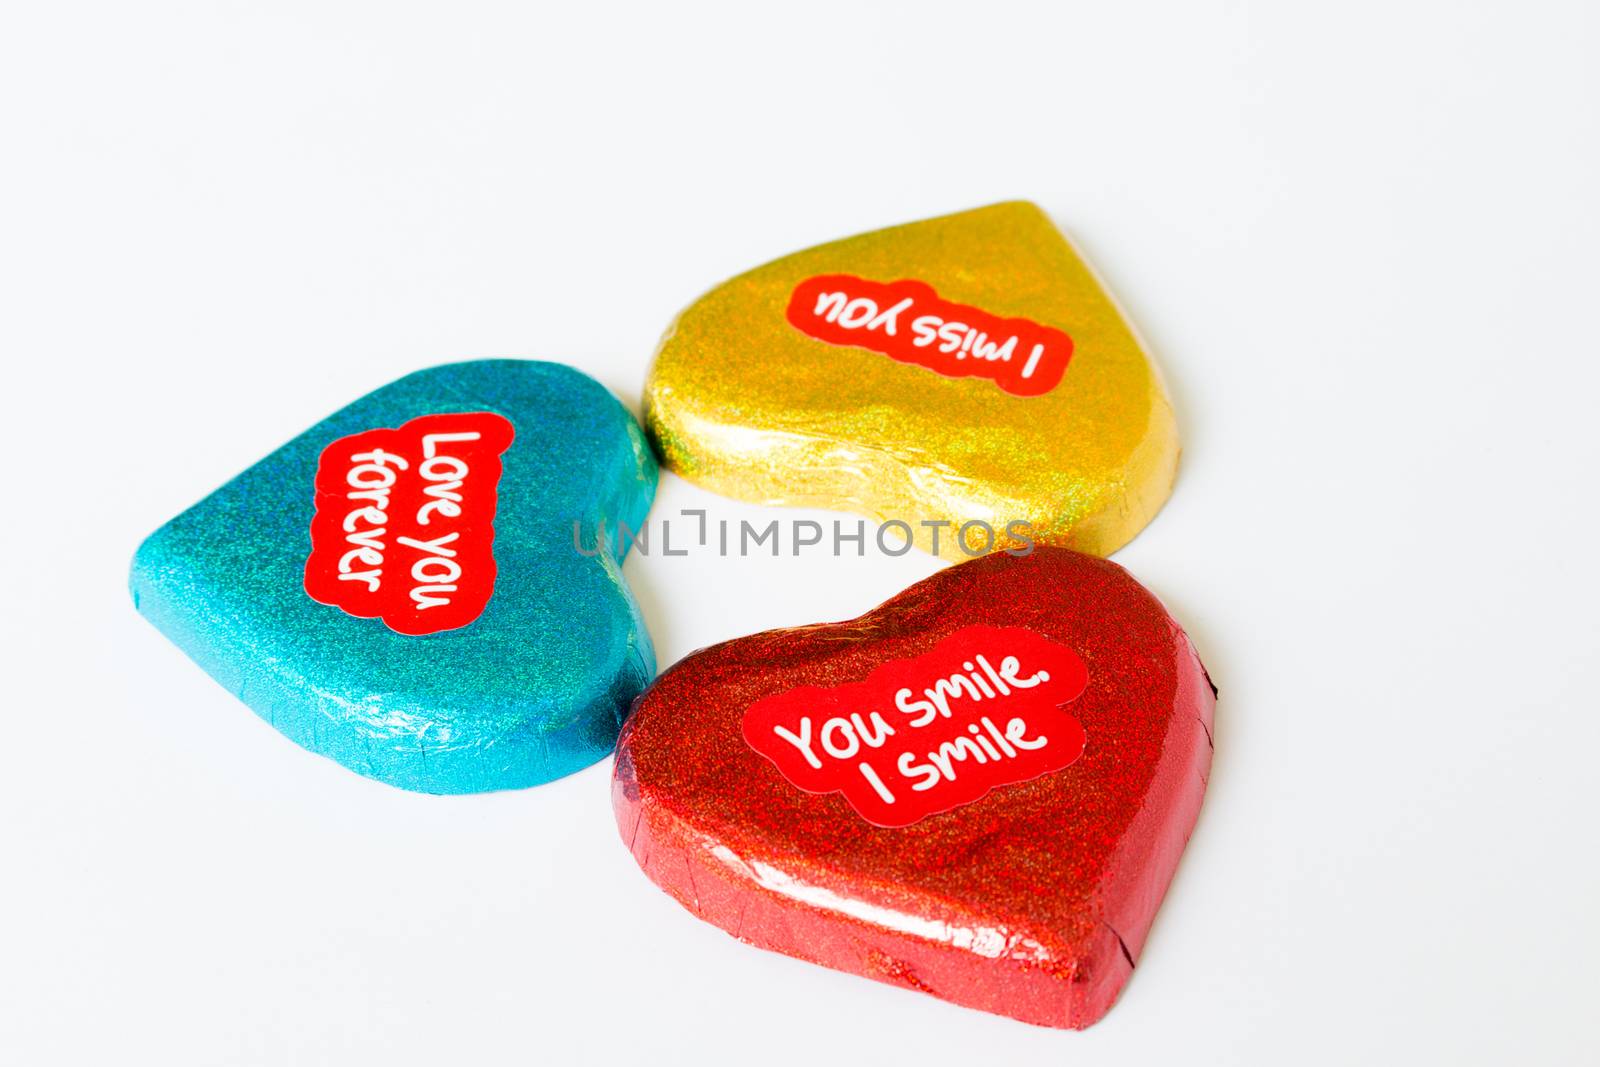 Chocolate wrapper  on Valentine's Day,colorful chocolate heart by N_u_T